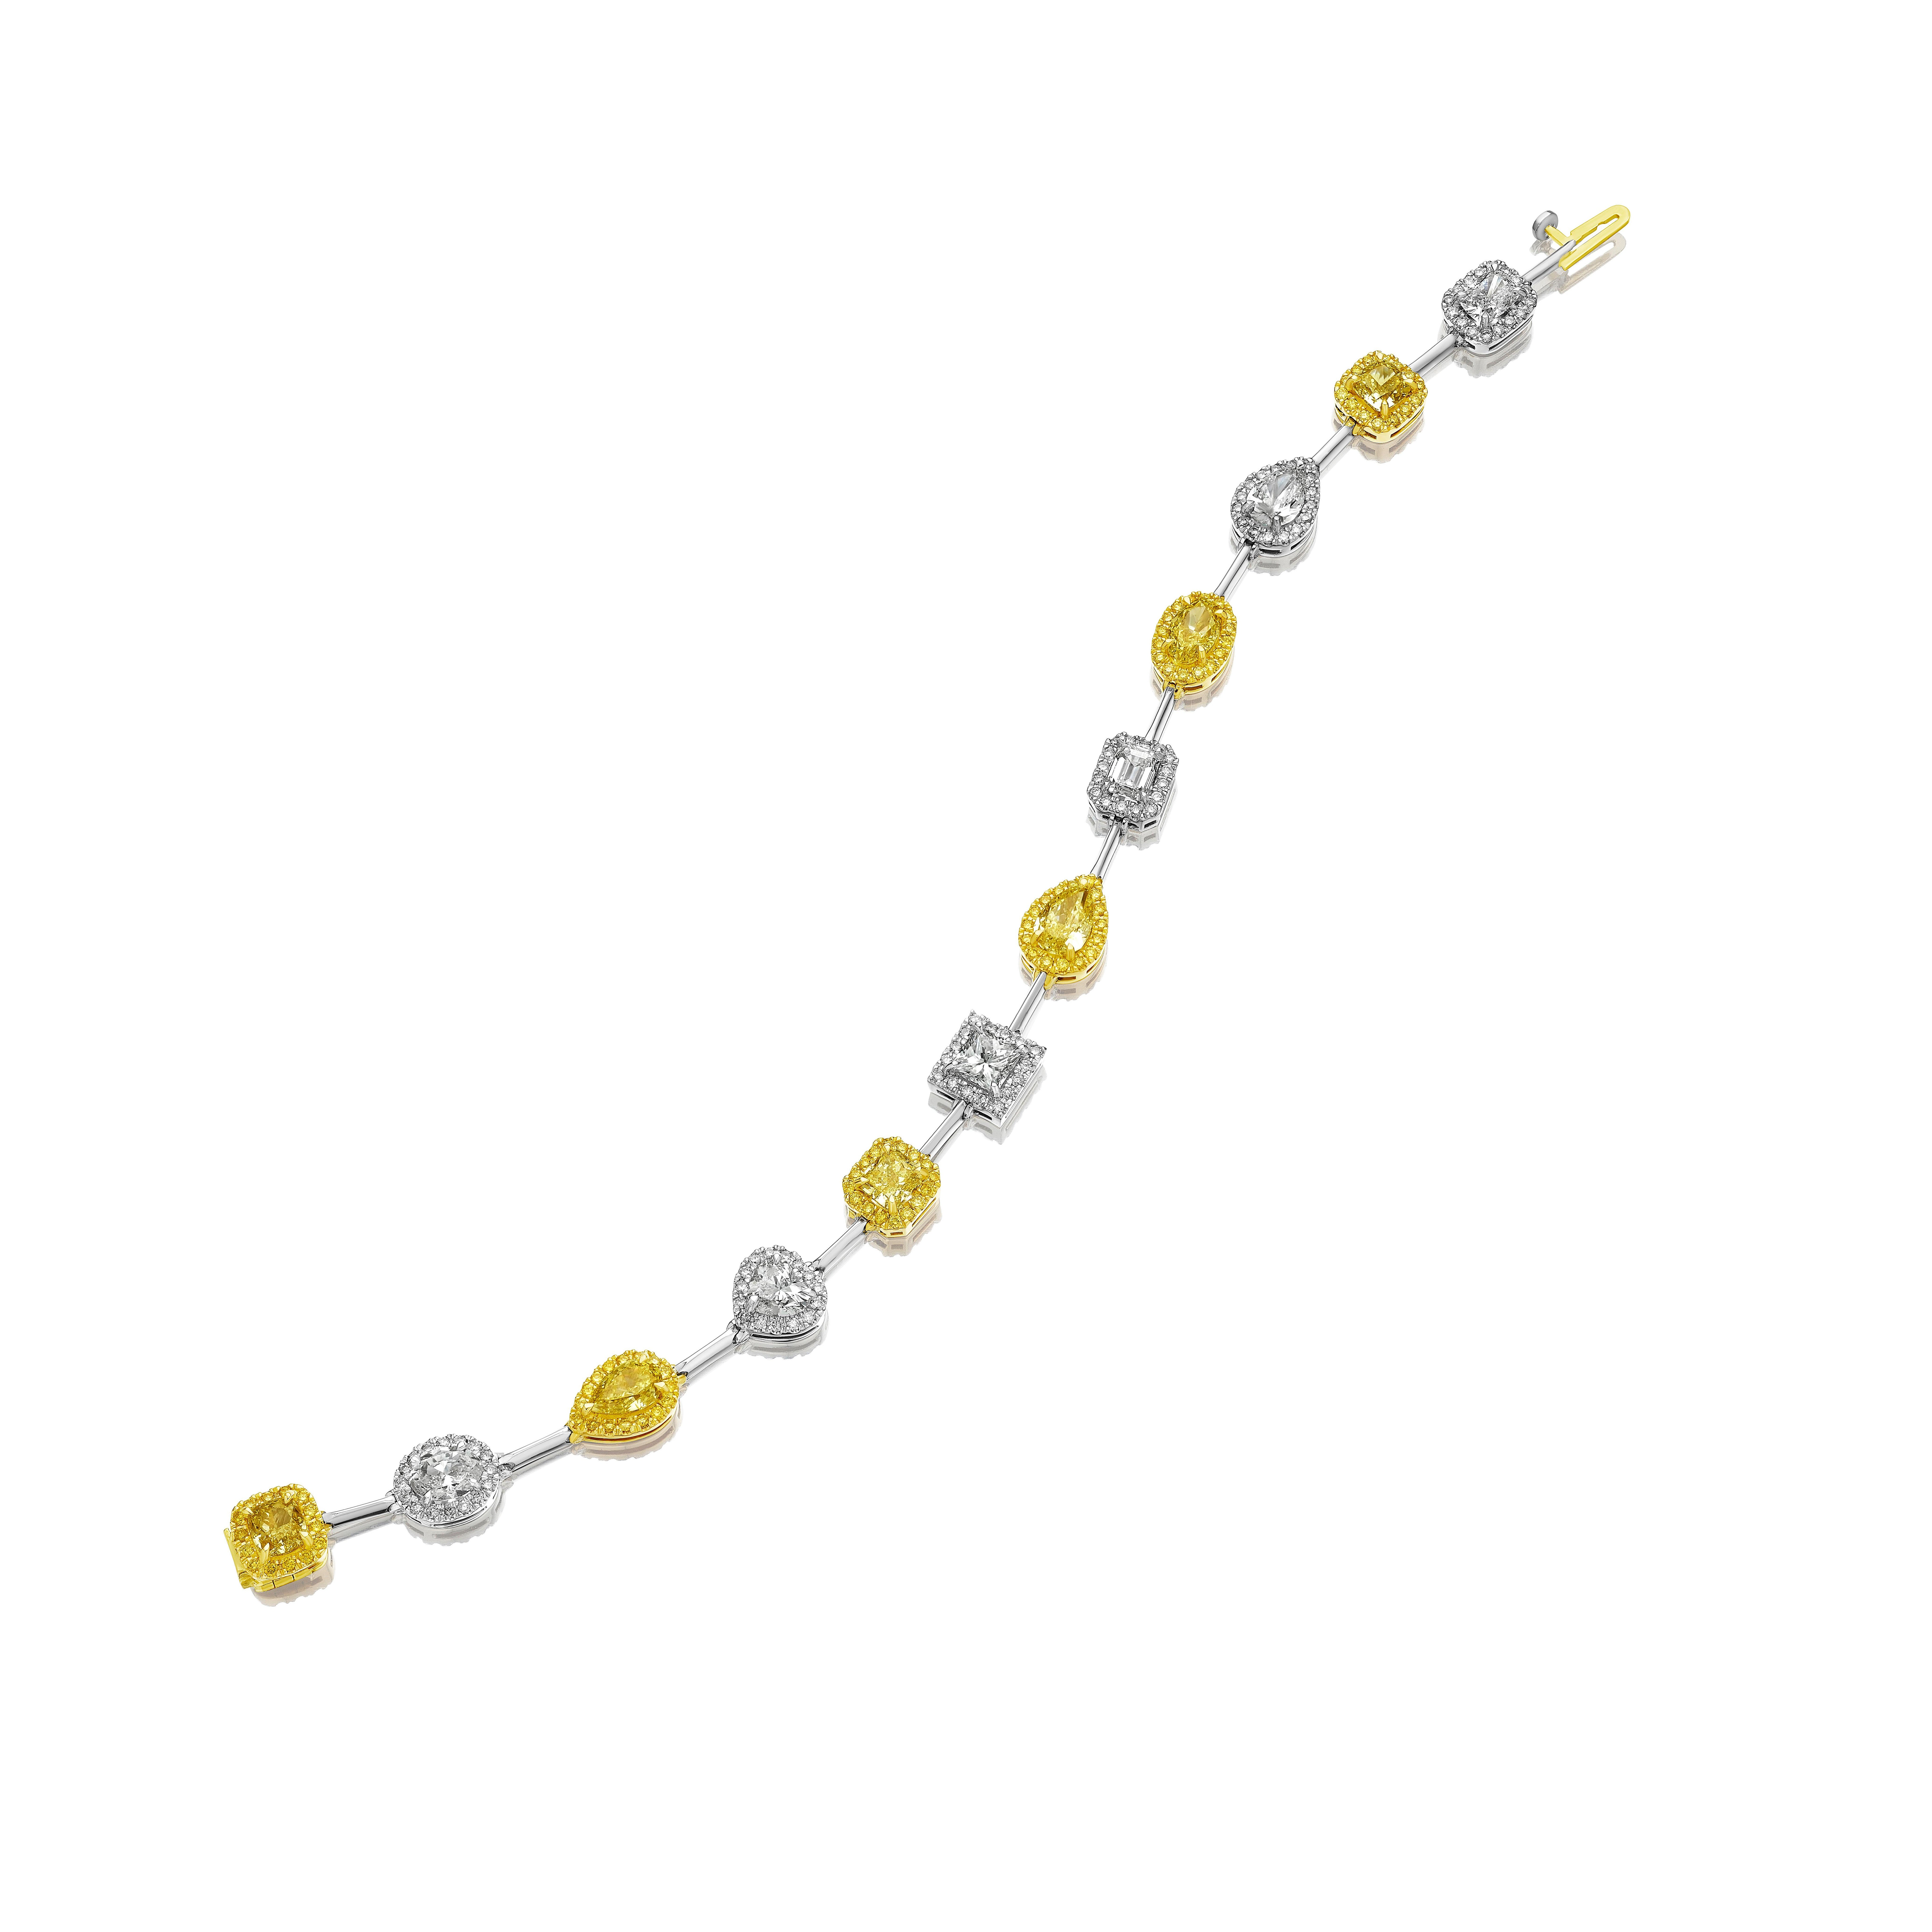 Gorgeous multi shaped Yellow and White Diamond bracelet. Cushion, Oval,  Pear, Emerald Cut and Square shaped Diamonds. Each weighing between 0.70-1.01 Carats. 
Each Stone is certified by GIA. 12 individual certificates. 
White Diamonds certified as